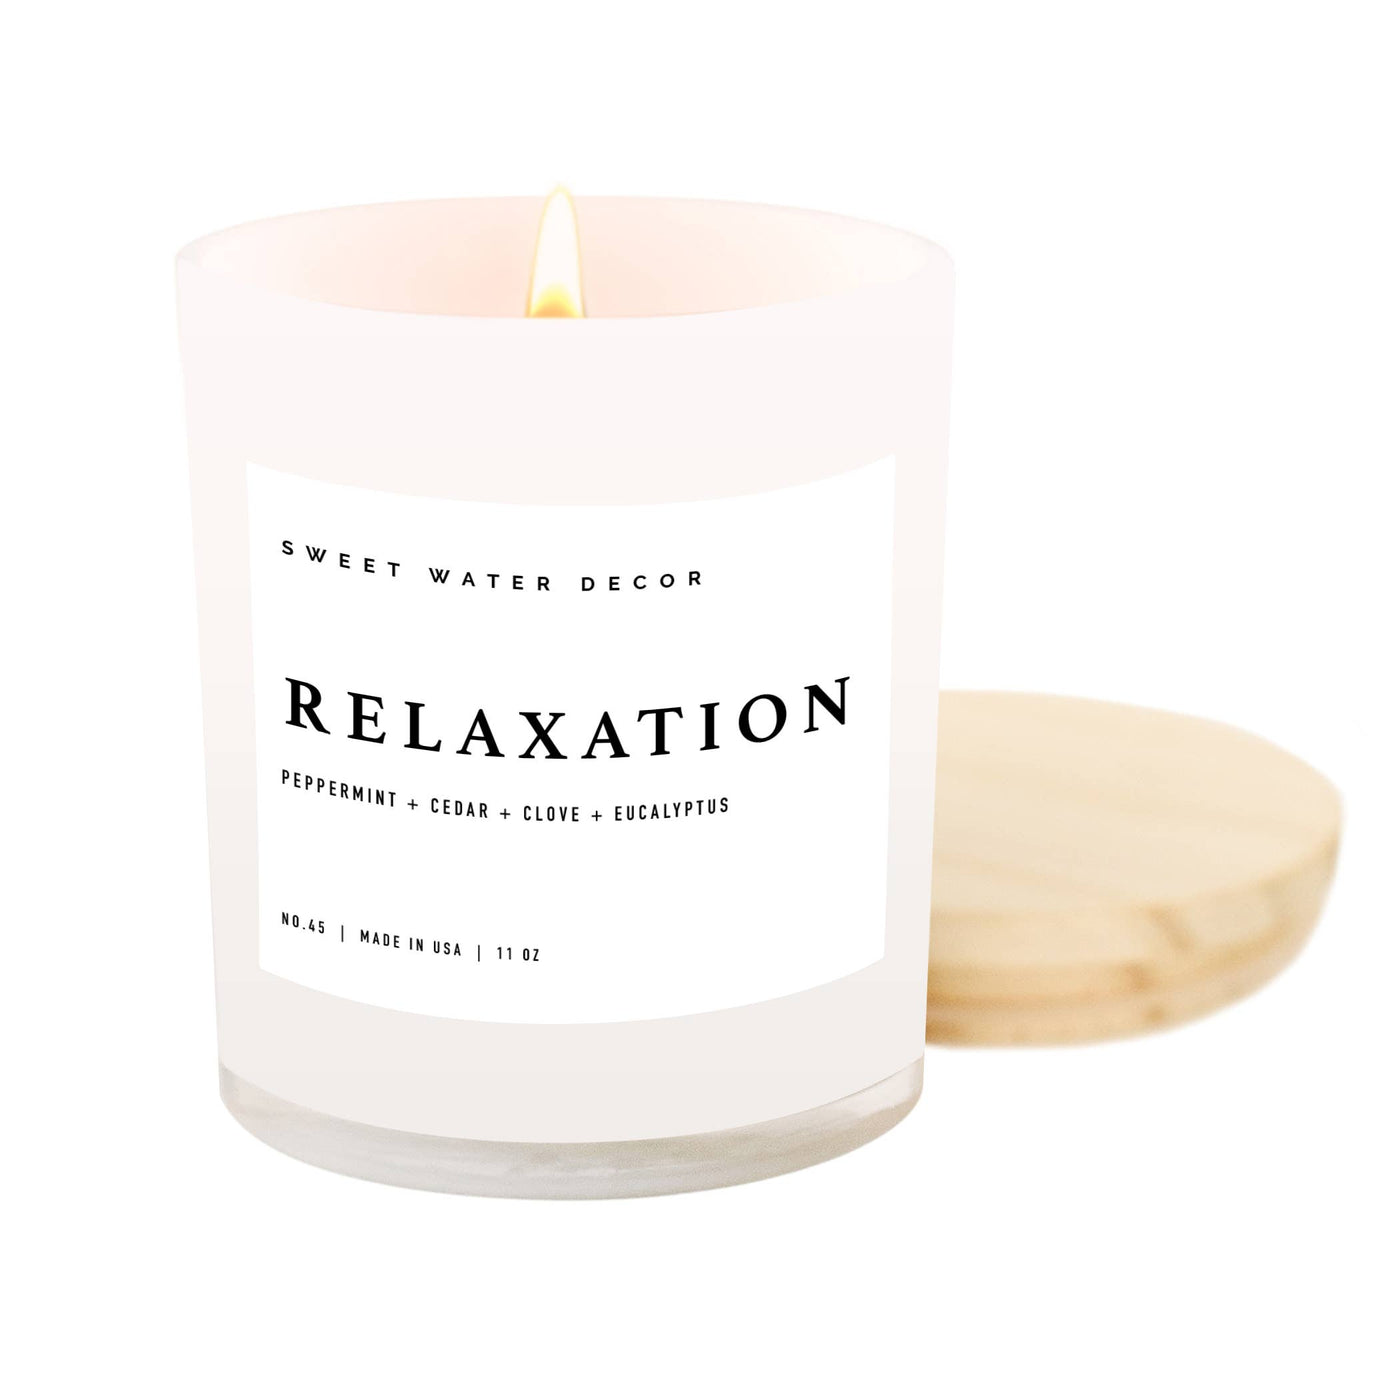 Sweet Water Decor - Relaxation Soy Candle - White Jar - 11 oz